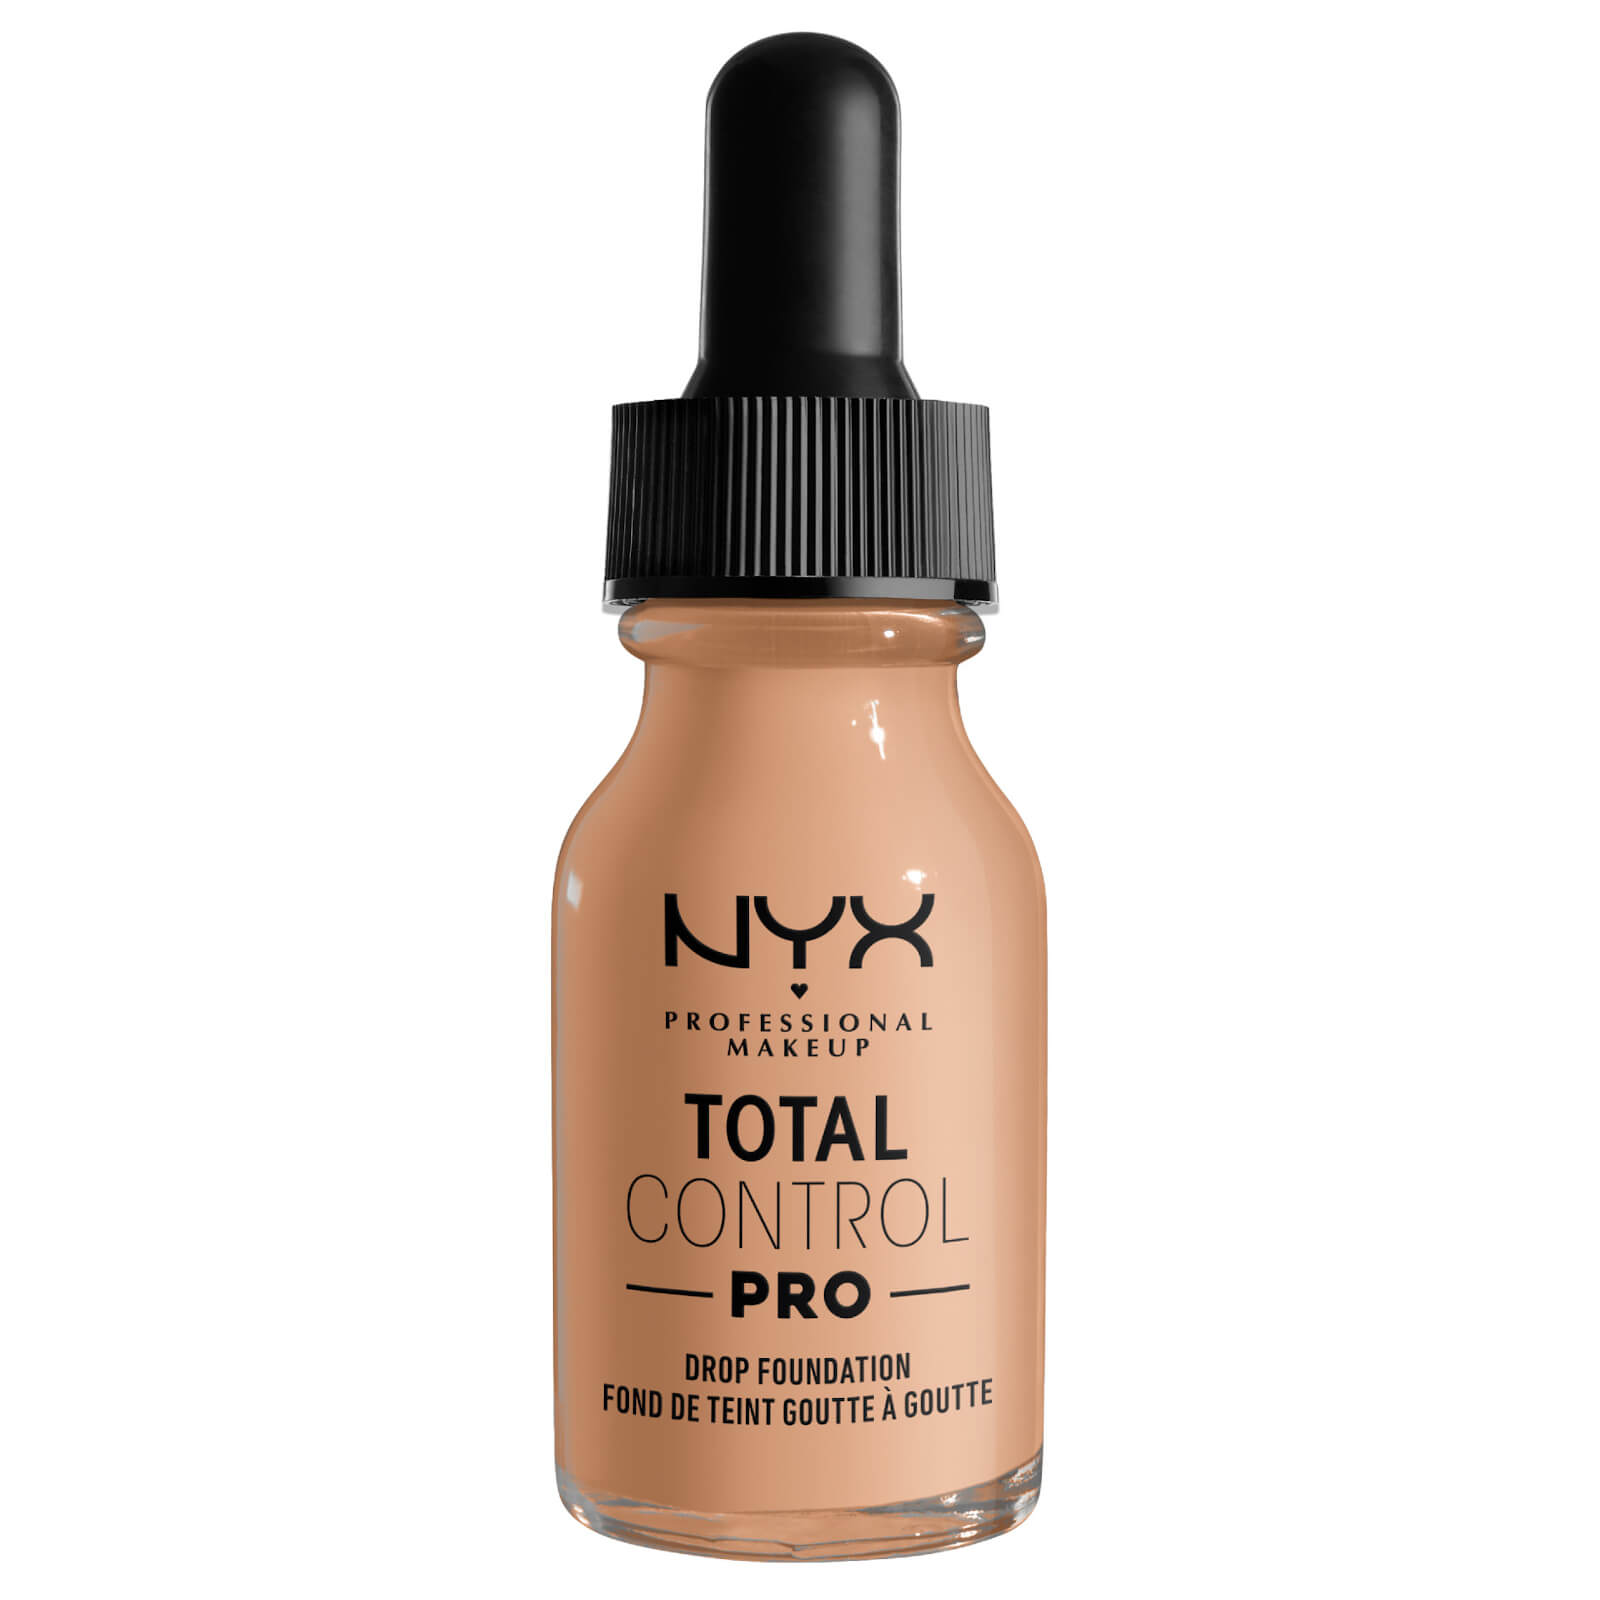 NYX Professional Makeup Total Control Pro Drop Controllable Coverage Foundation 13ml (Various Shades) - Soft Beige